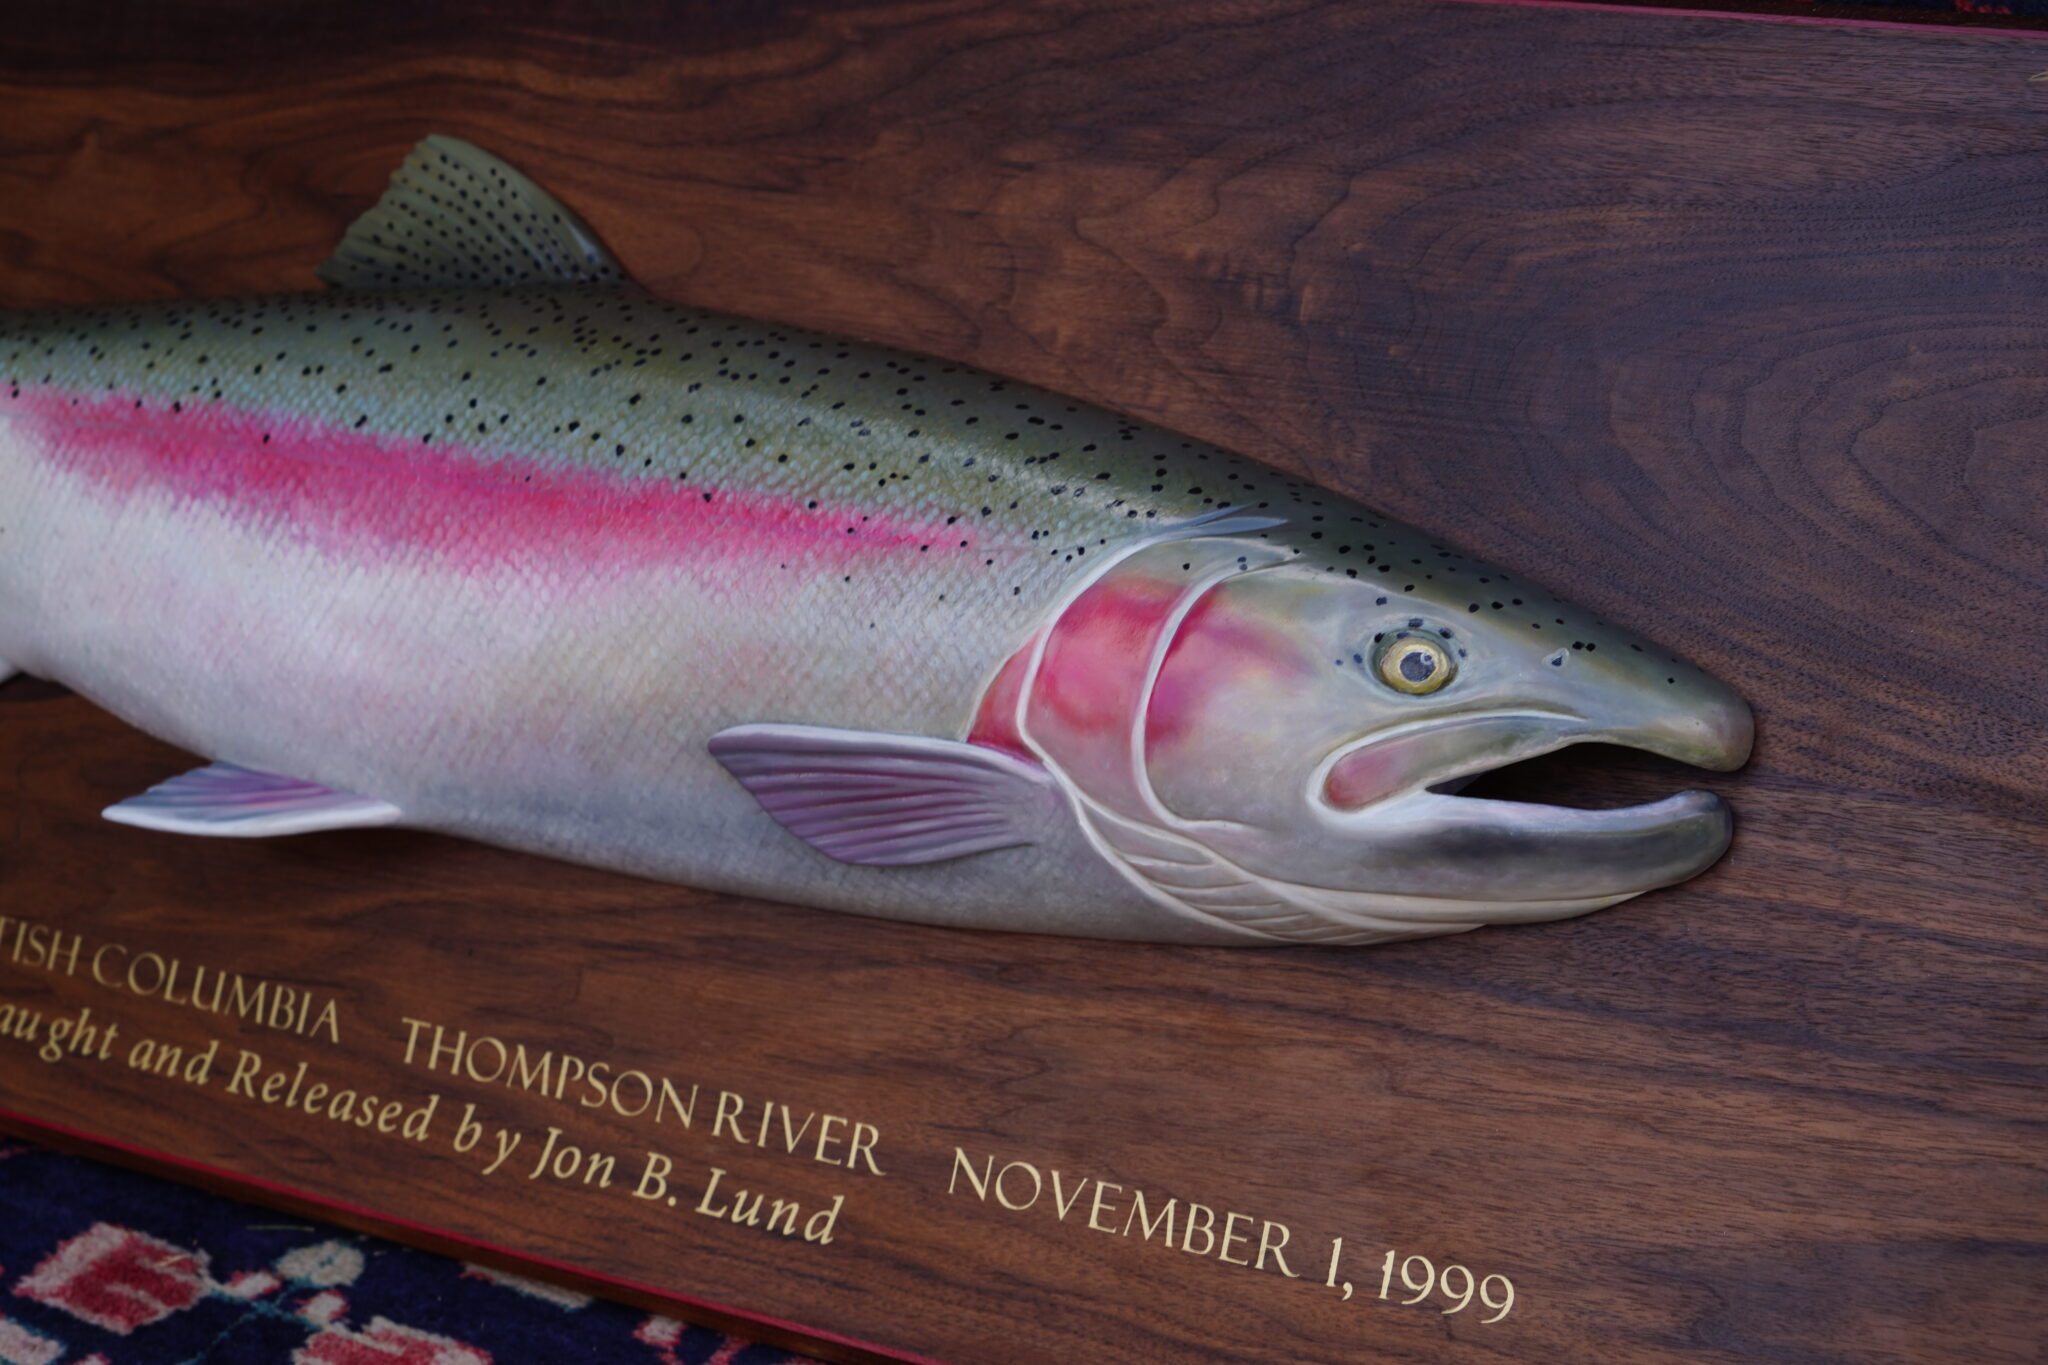 A close-up shot of silver and pink colour fish